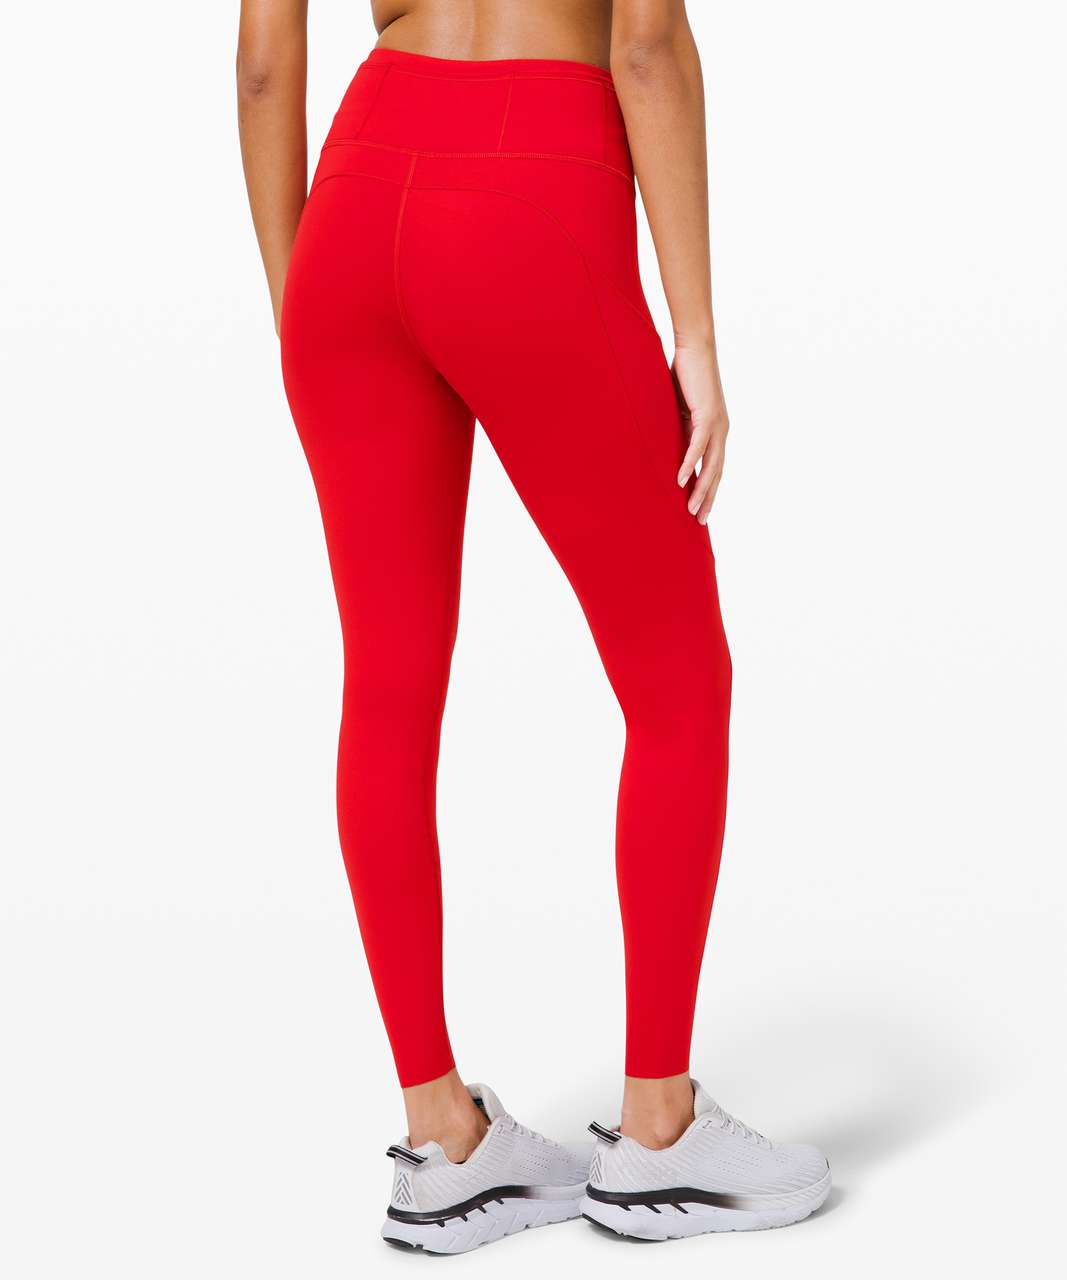 Lululemon Fast and Free High-Rise Tight 28" *Non-Reflective Brushed Nulux - Dark Red